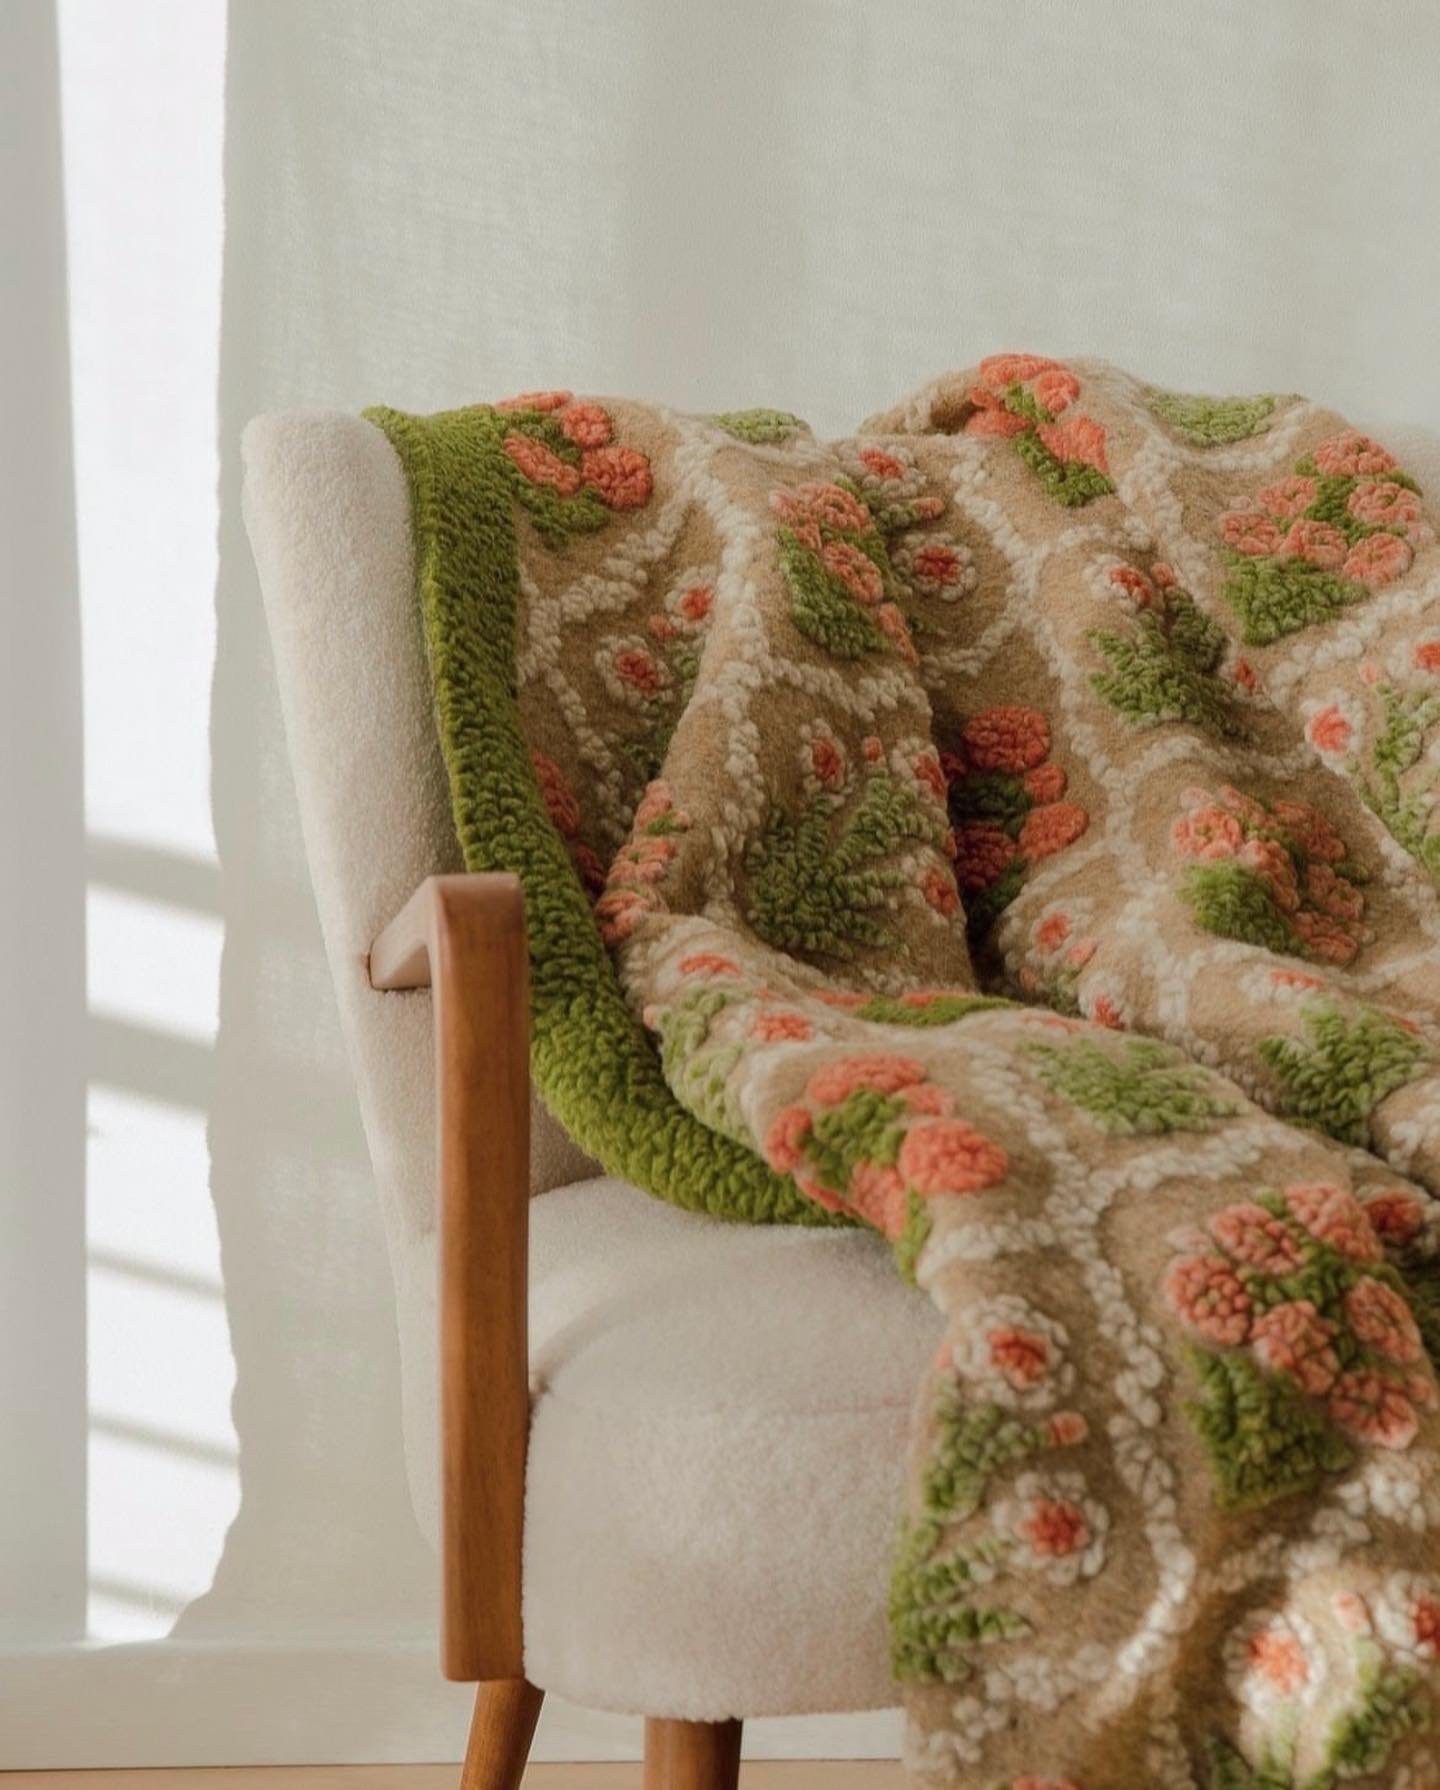 Frati Home: Where Tradition Meets Sustainable Luxury🌸 

Dive into a world of exquisite fabrics crafted with care and conscience. From bamboo fleece to boiled wool, each piece is thoughtfully created to ensure your comfort and care for the planet. 

